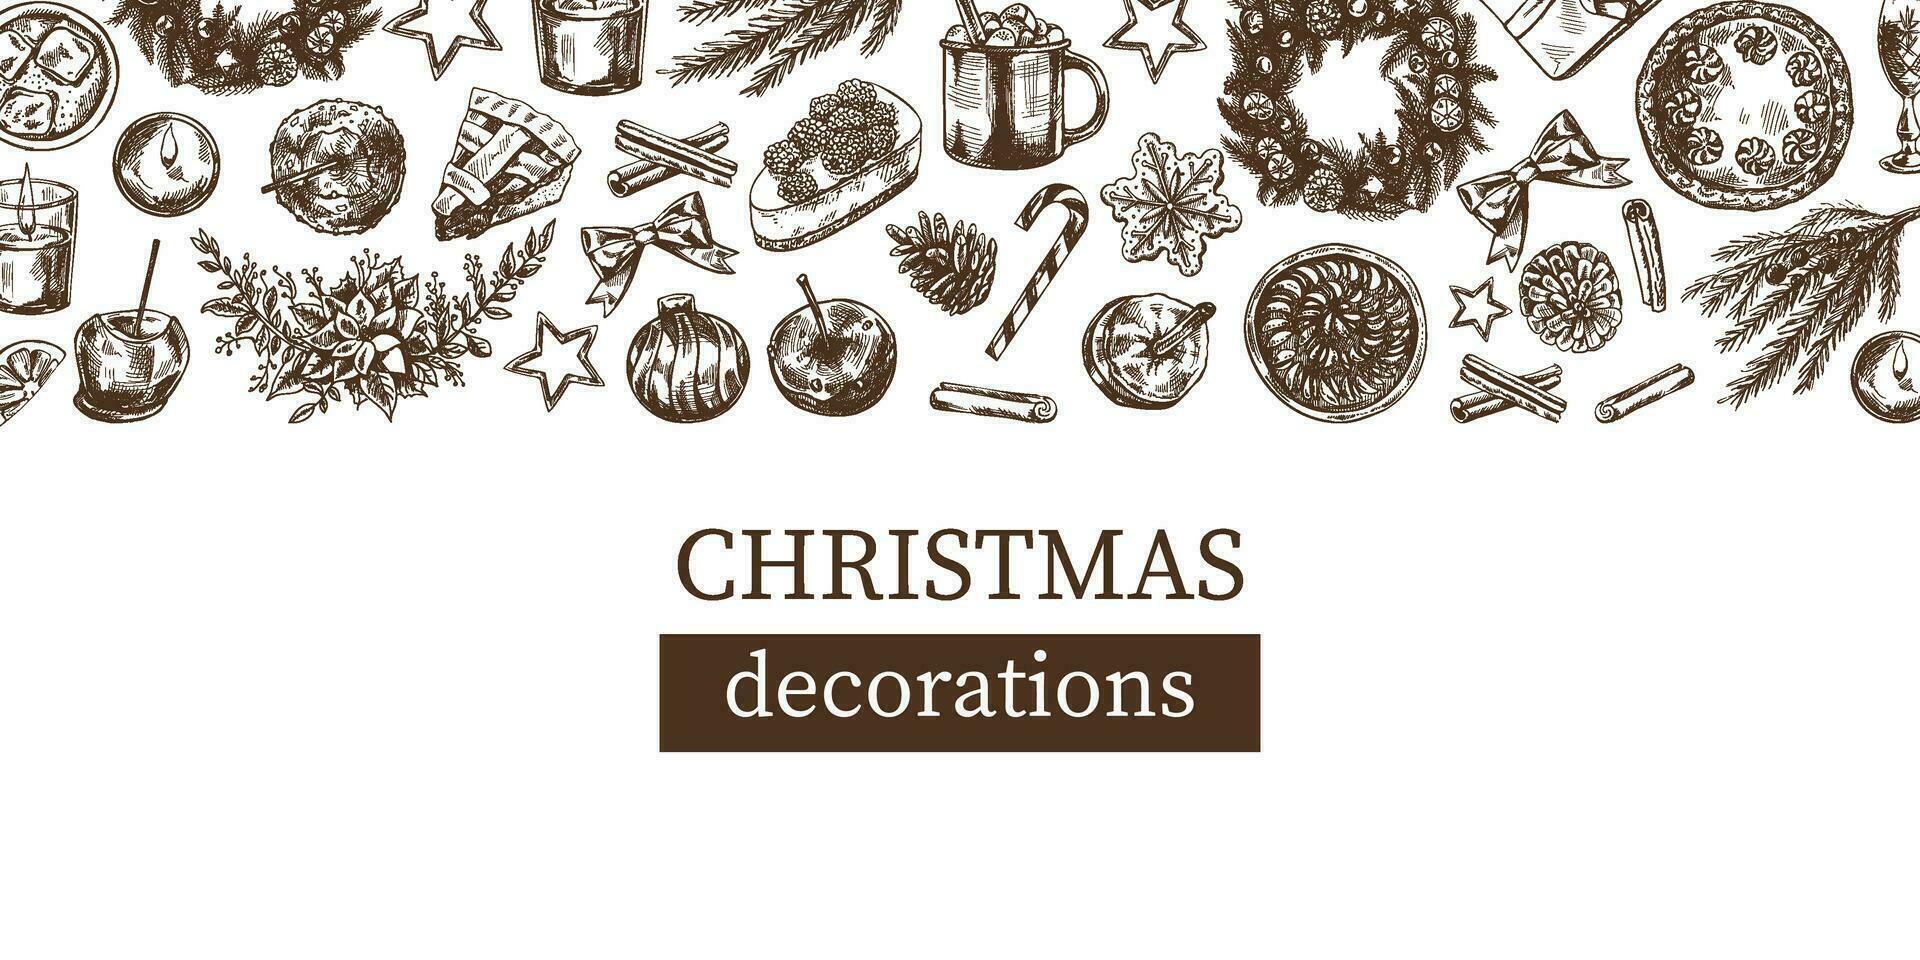 Hand-drawn Christmas template in sketch style. Festive decoration - wreath, gift, sweets, food, Christmas tree decor, drinks and spices sketches. Vintage design with an empty space. vector